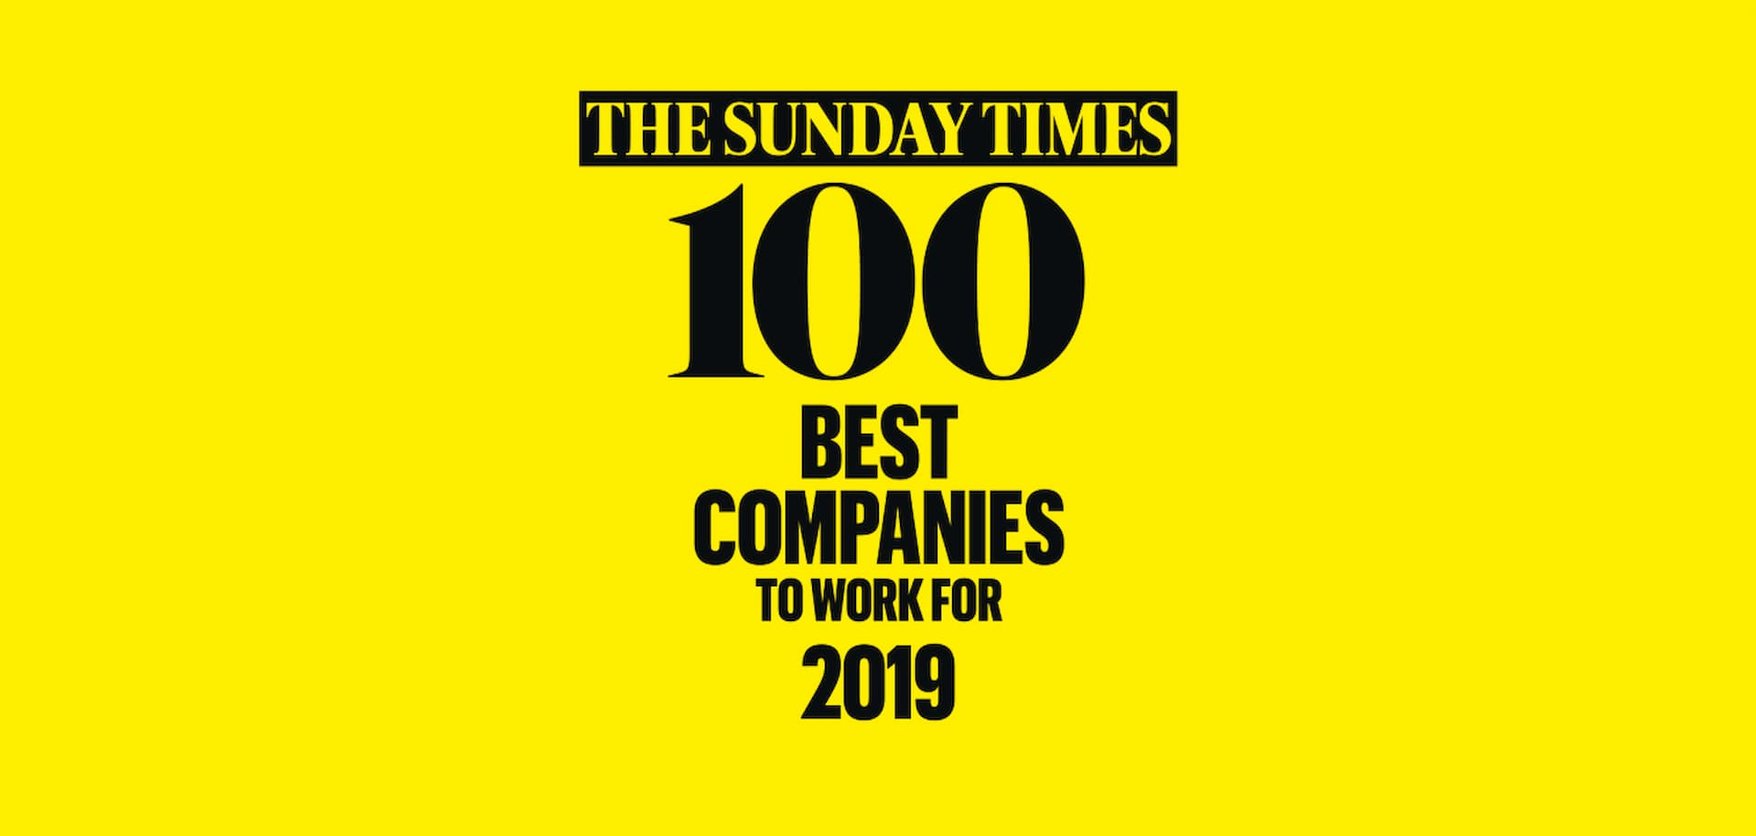 Three’s a Charm for AND Digital in The Sunday Times 100 Best Companies 2019 (1)